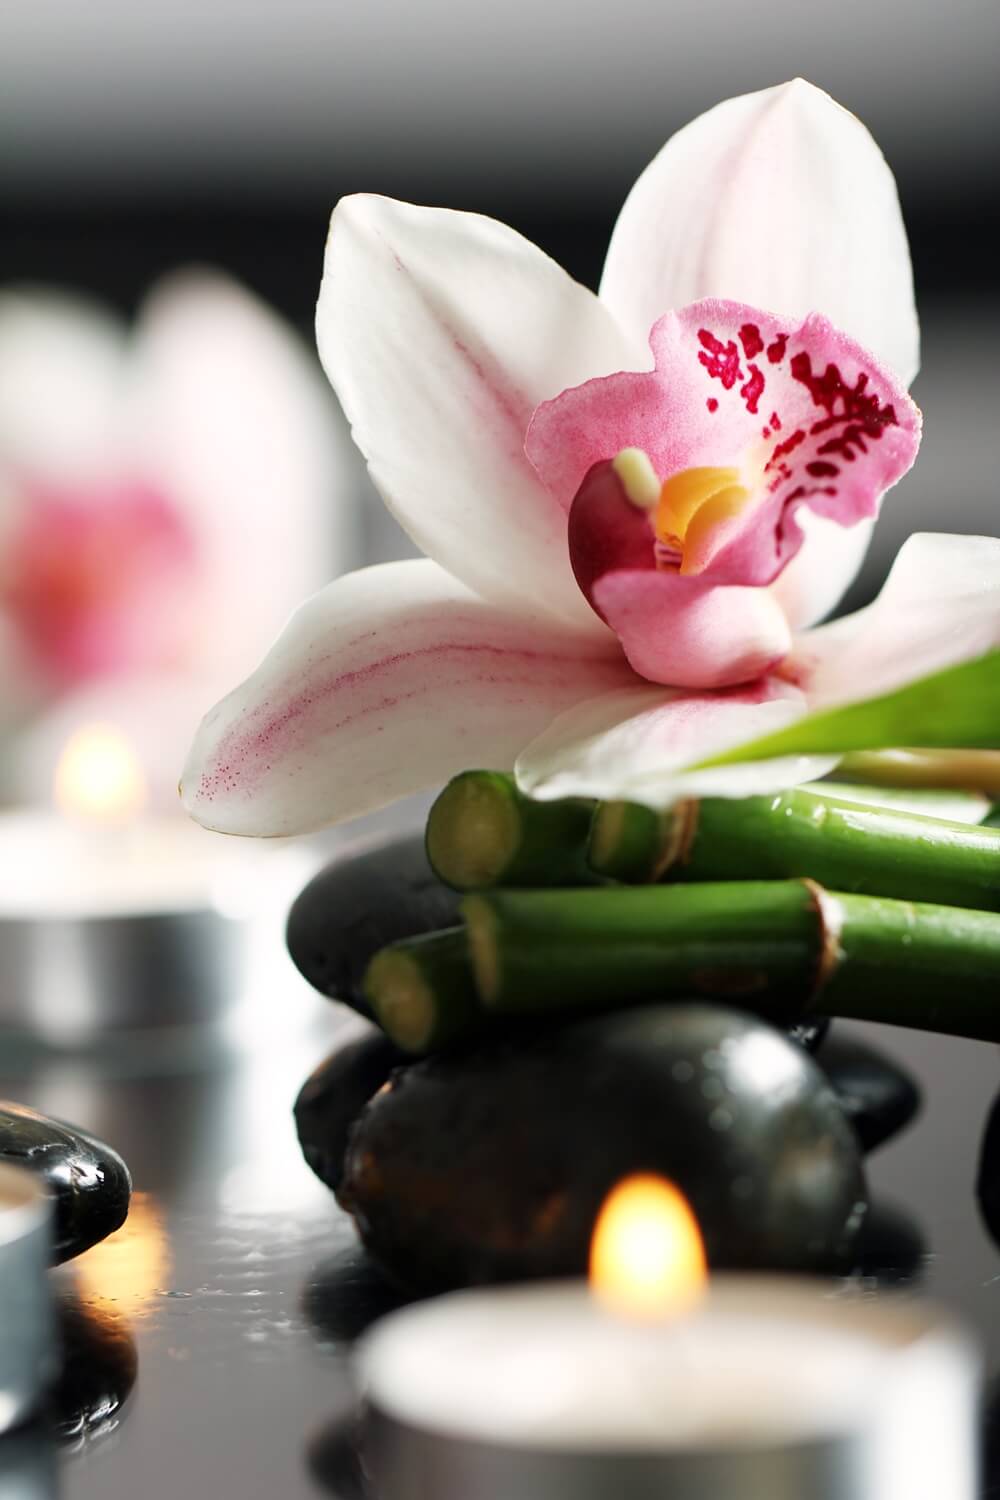 Smooth massage stones and delicate flowers rest on a warm wooden table, creating a tranquil spa atmosphere